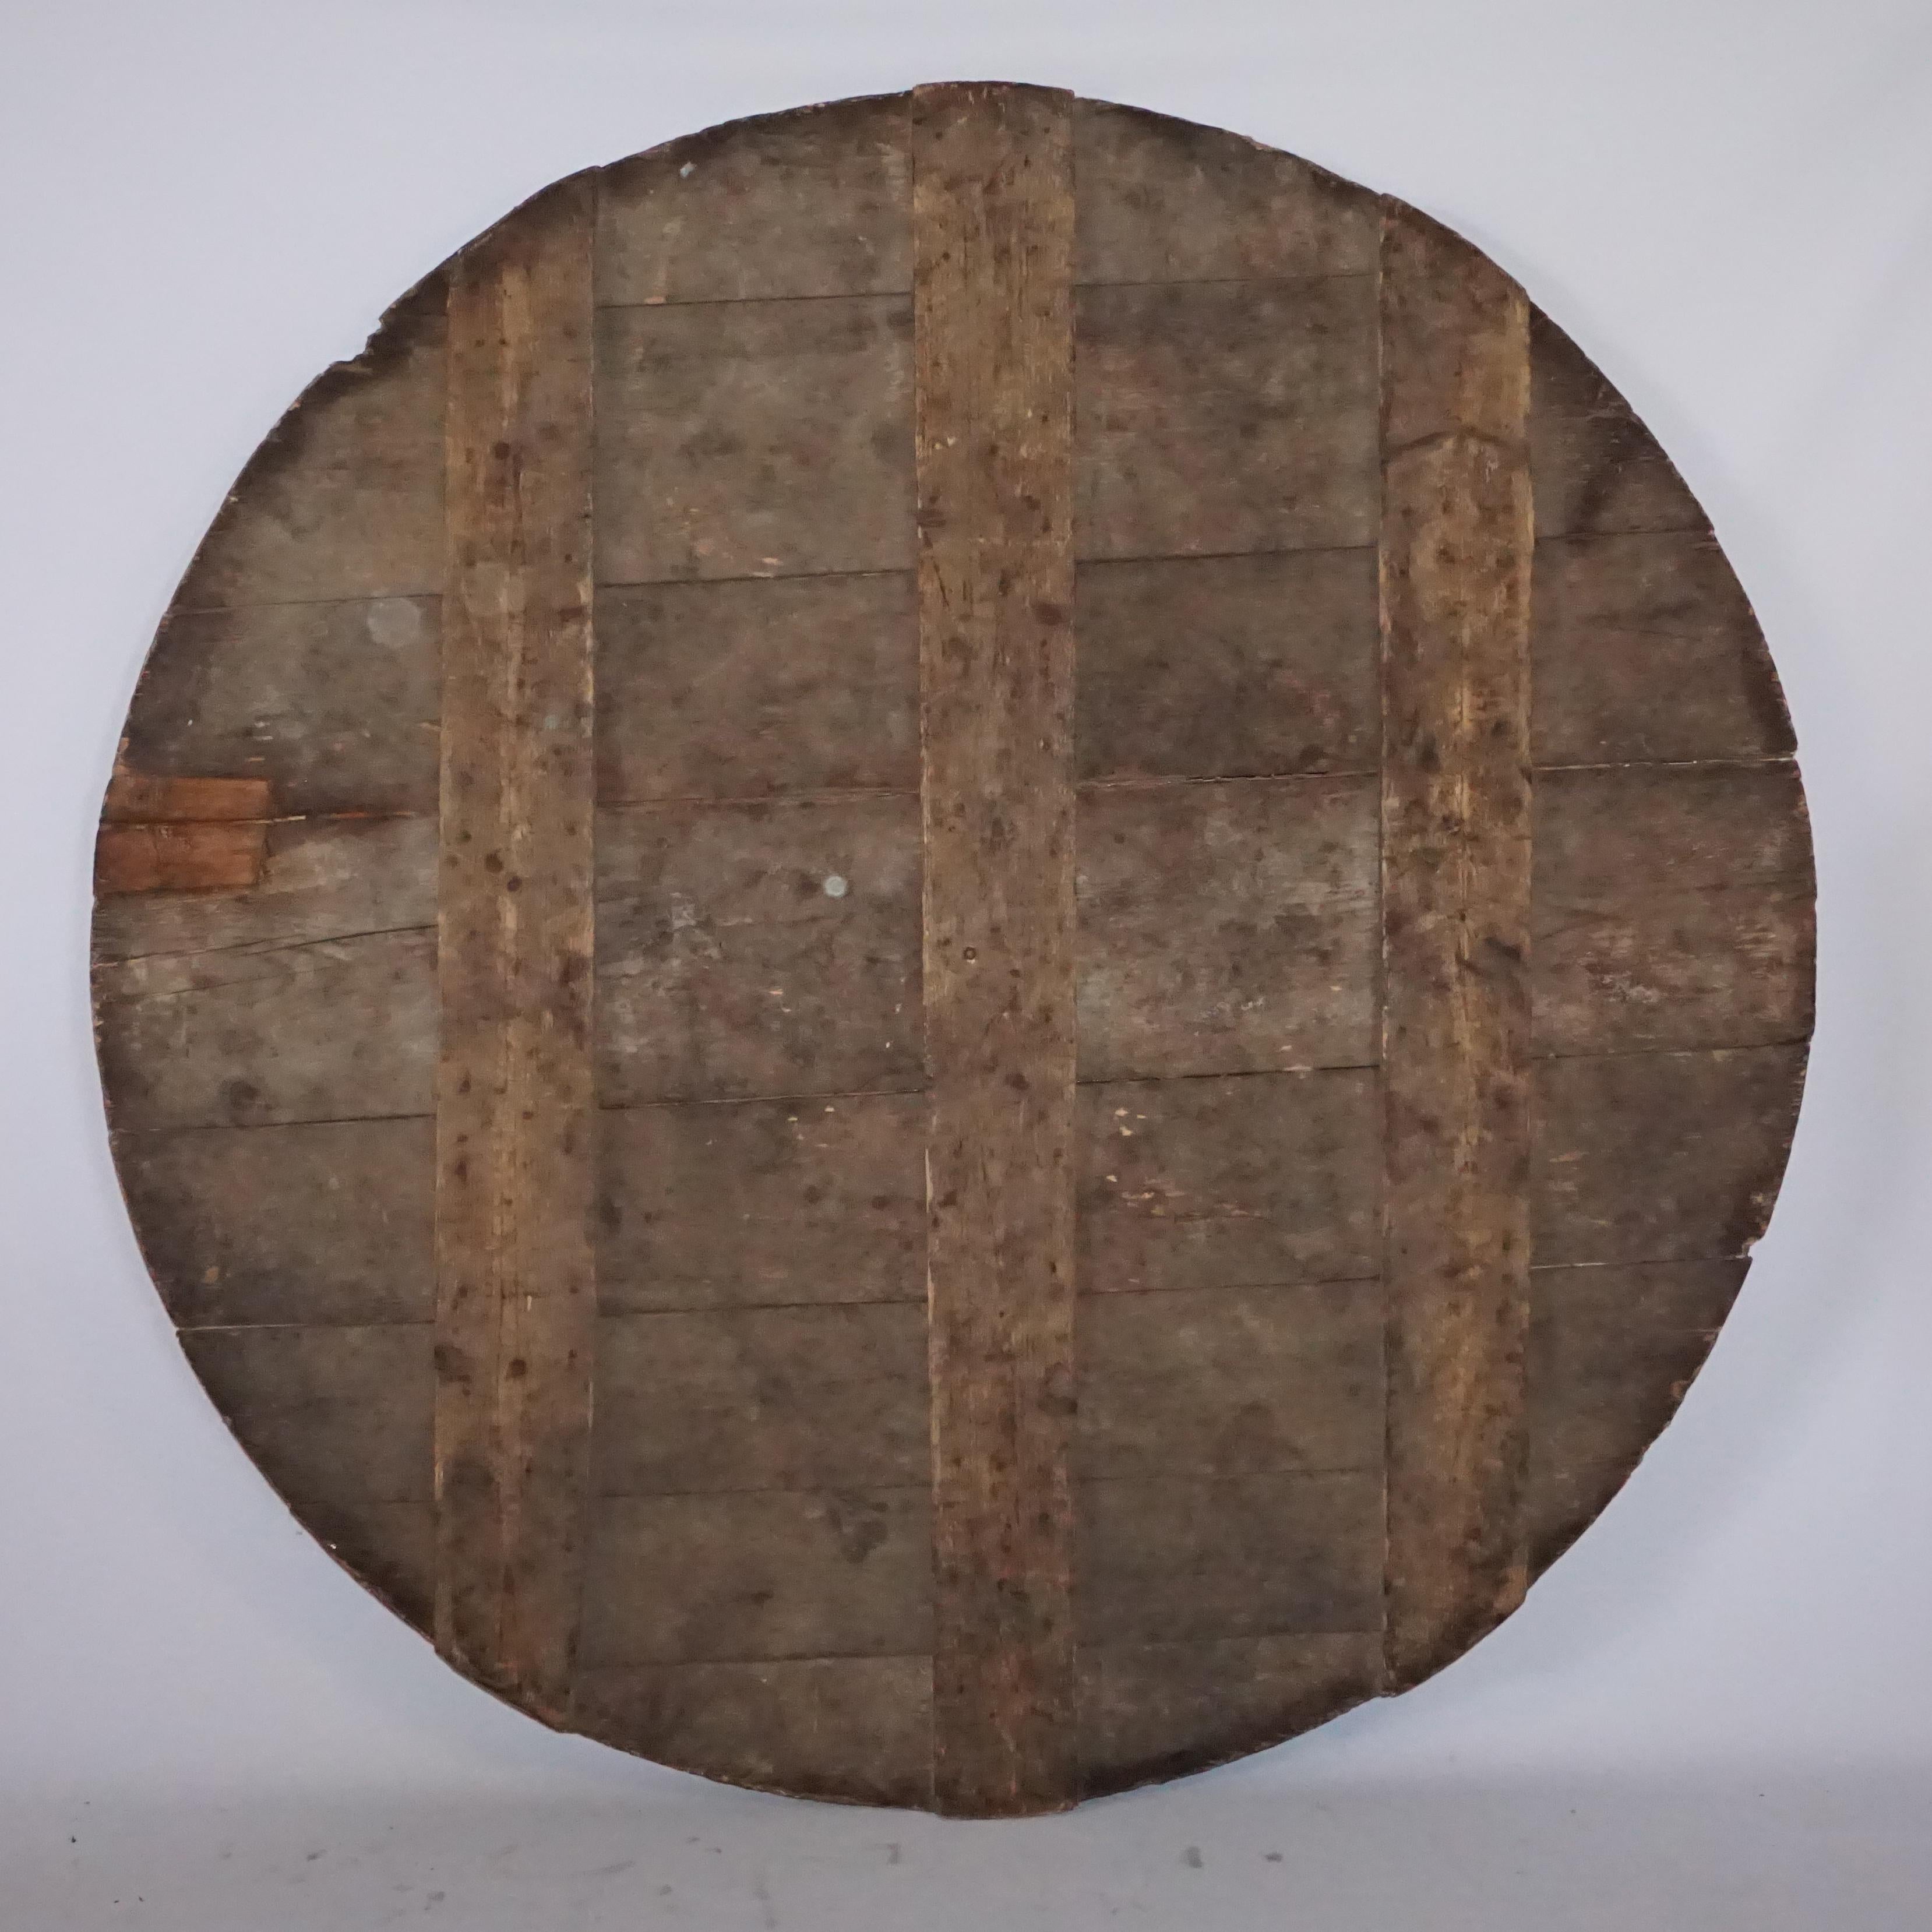 A round, antique French large dimensional clock face with its original clock made of hand painted wood from the Napoleon III period. In good condition, enhanced by detailed carvings. Wear consistent with age and use, circa 1890, France.